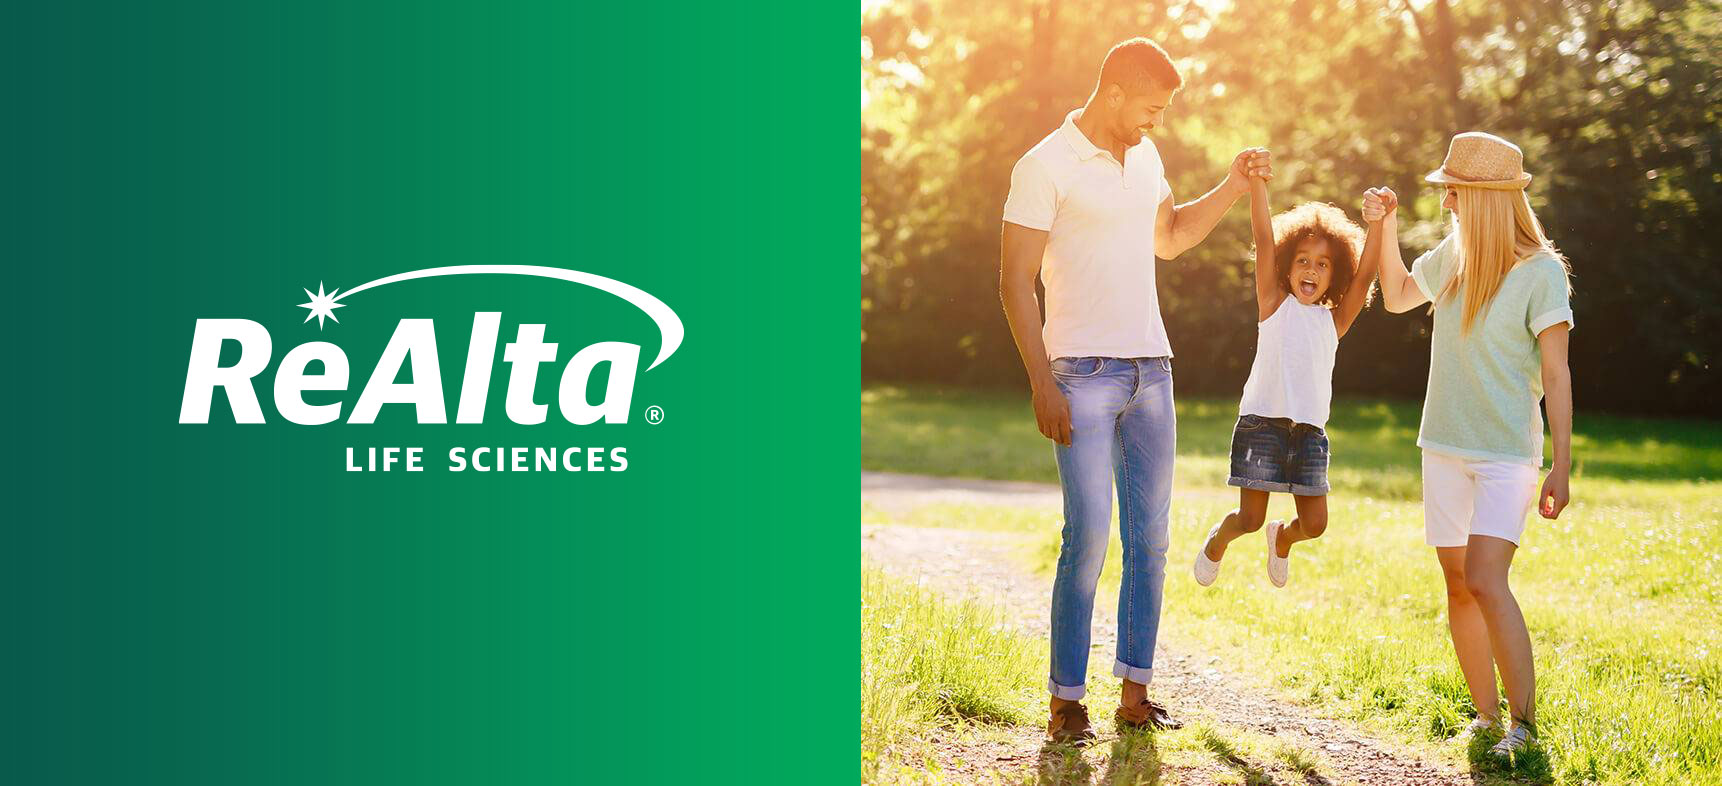 ReAlta Life Sciences - parents swinging child in the air between them